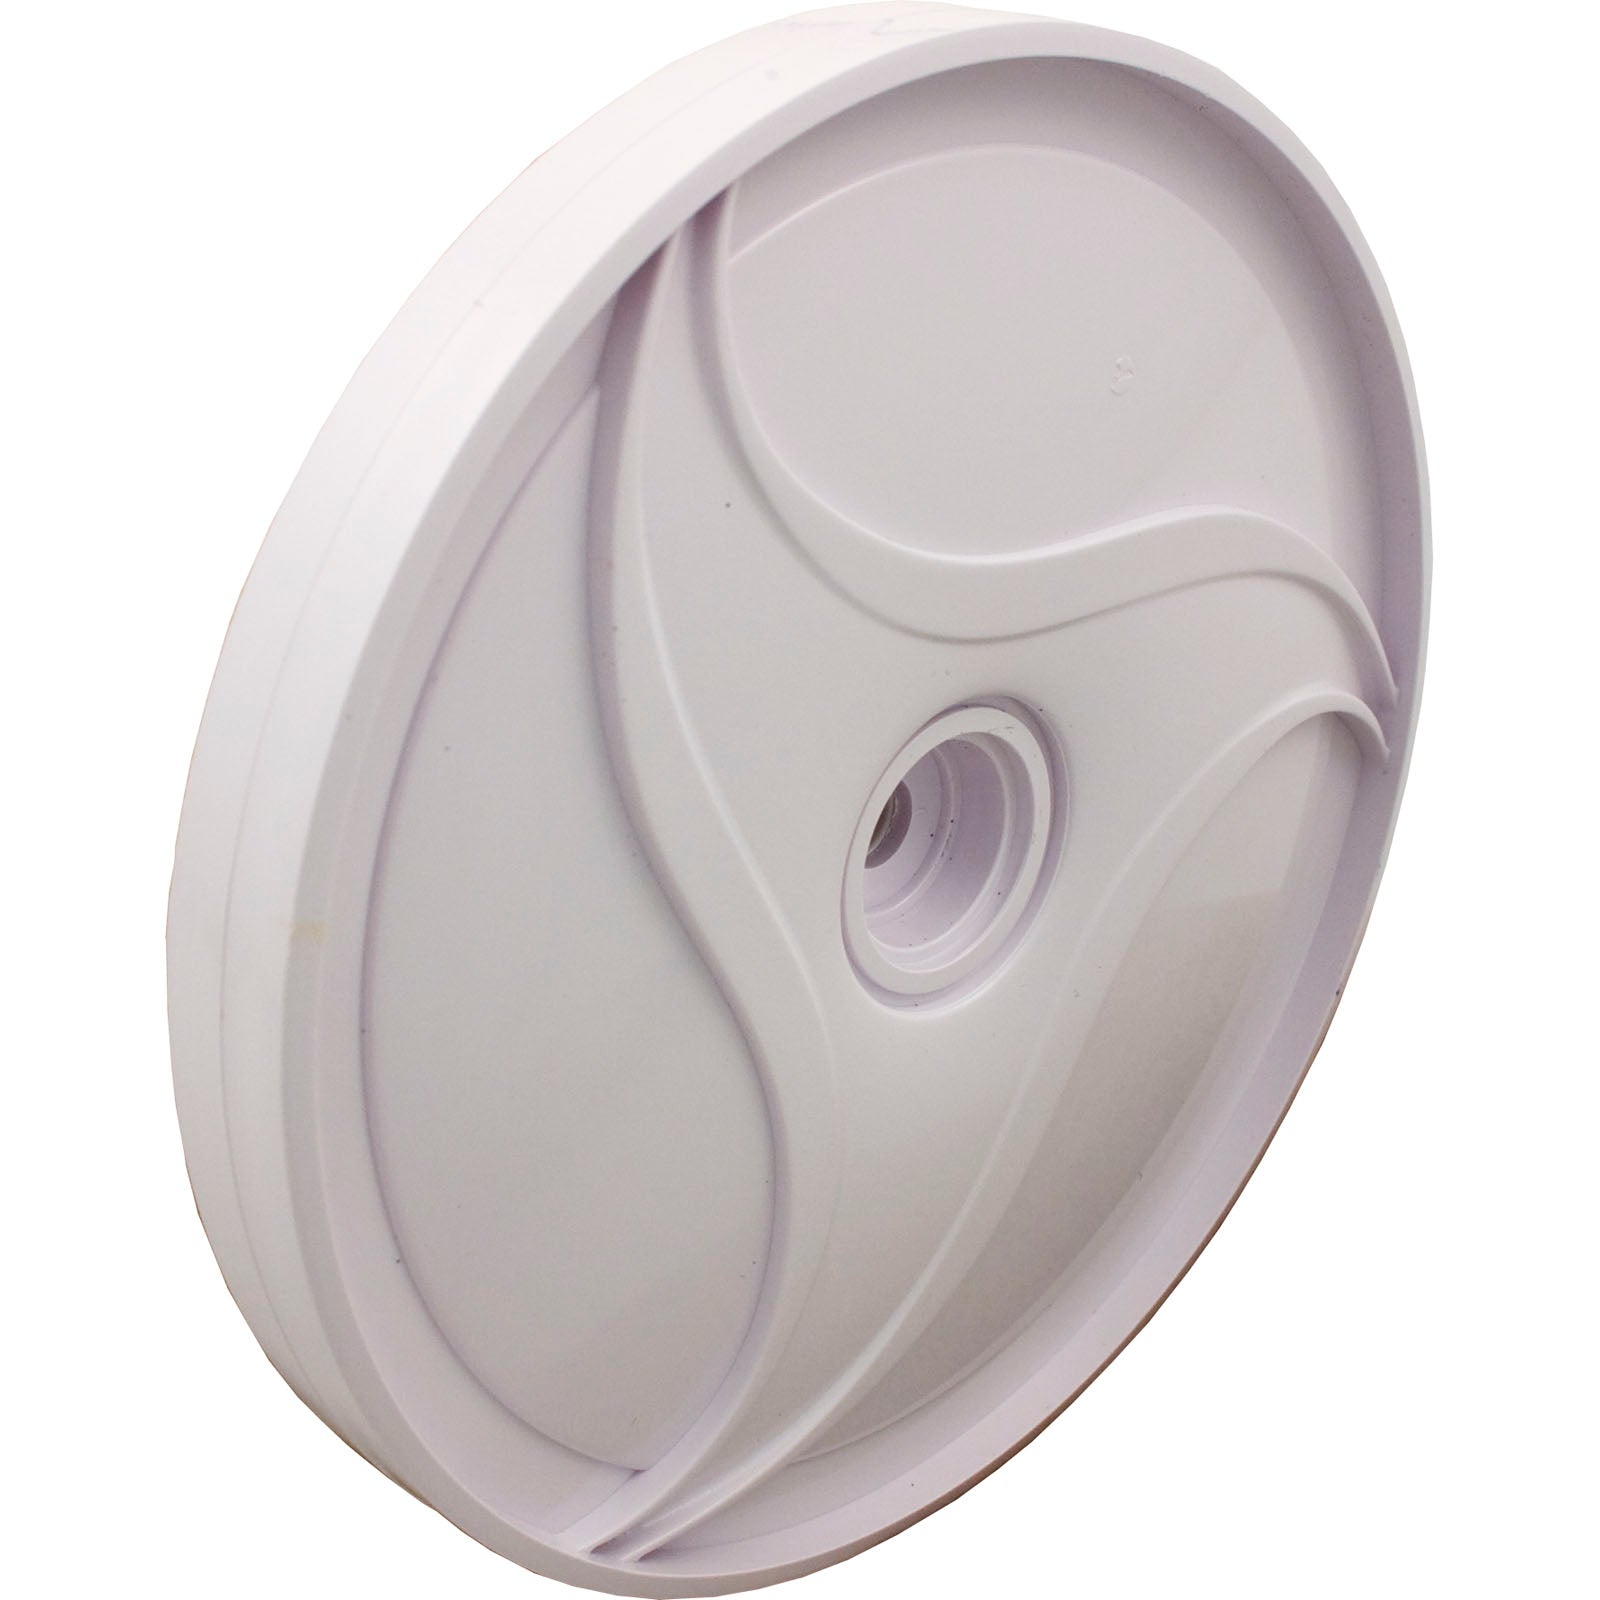 Polaris 9-100-1008 Double Side Wheel, White for Polaris 380/360 Cleaners ( No Bearings Included )